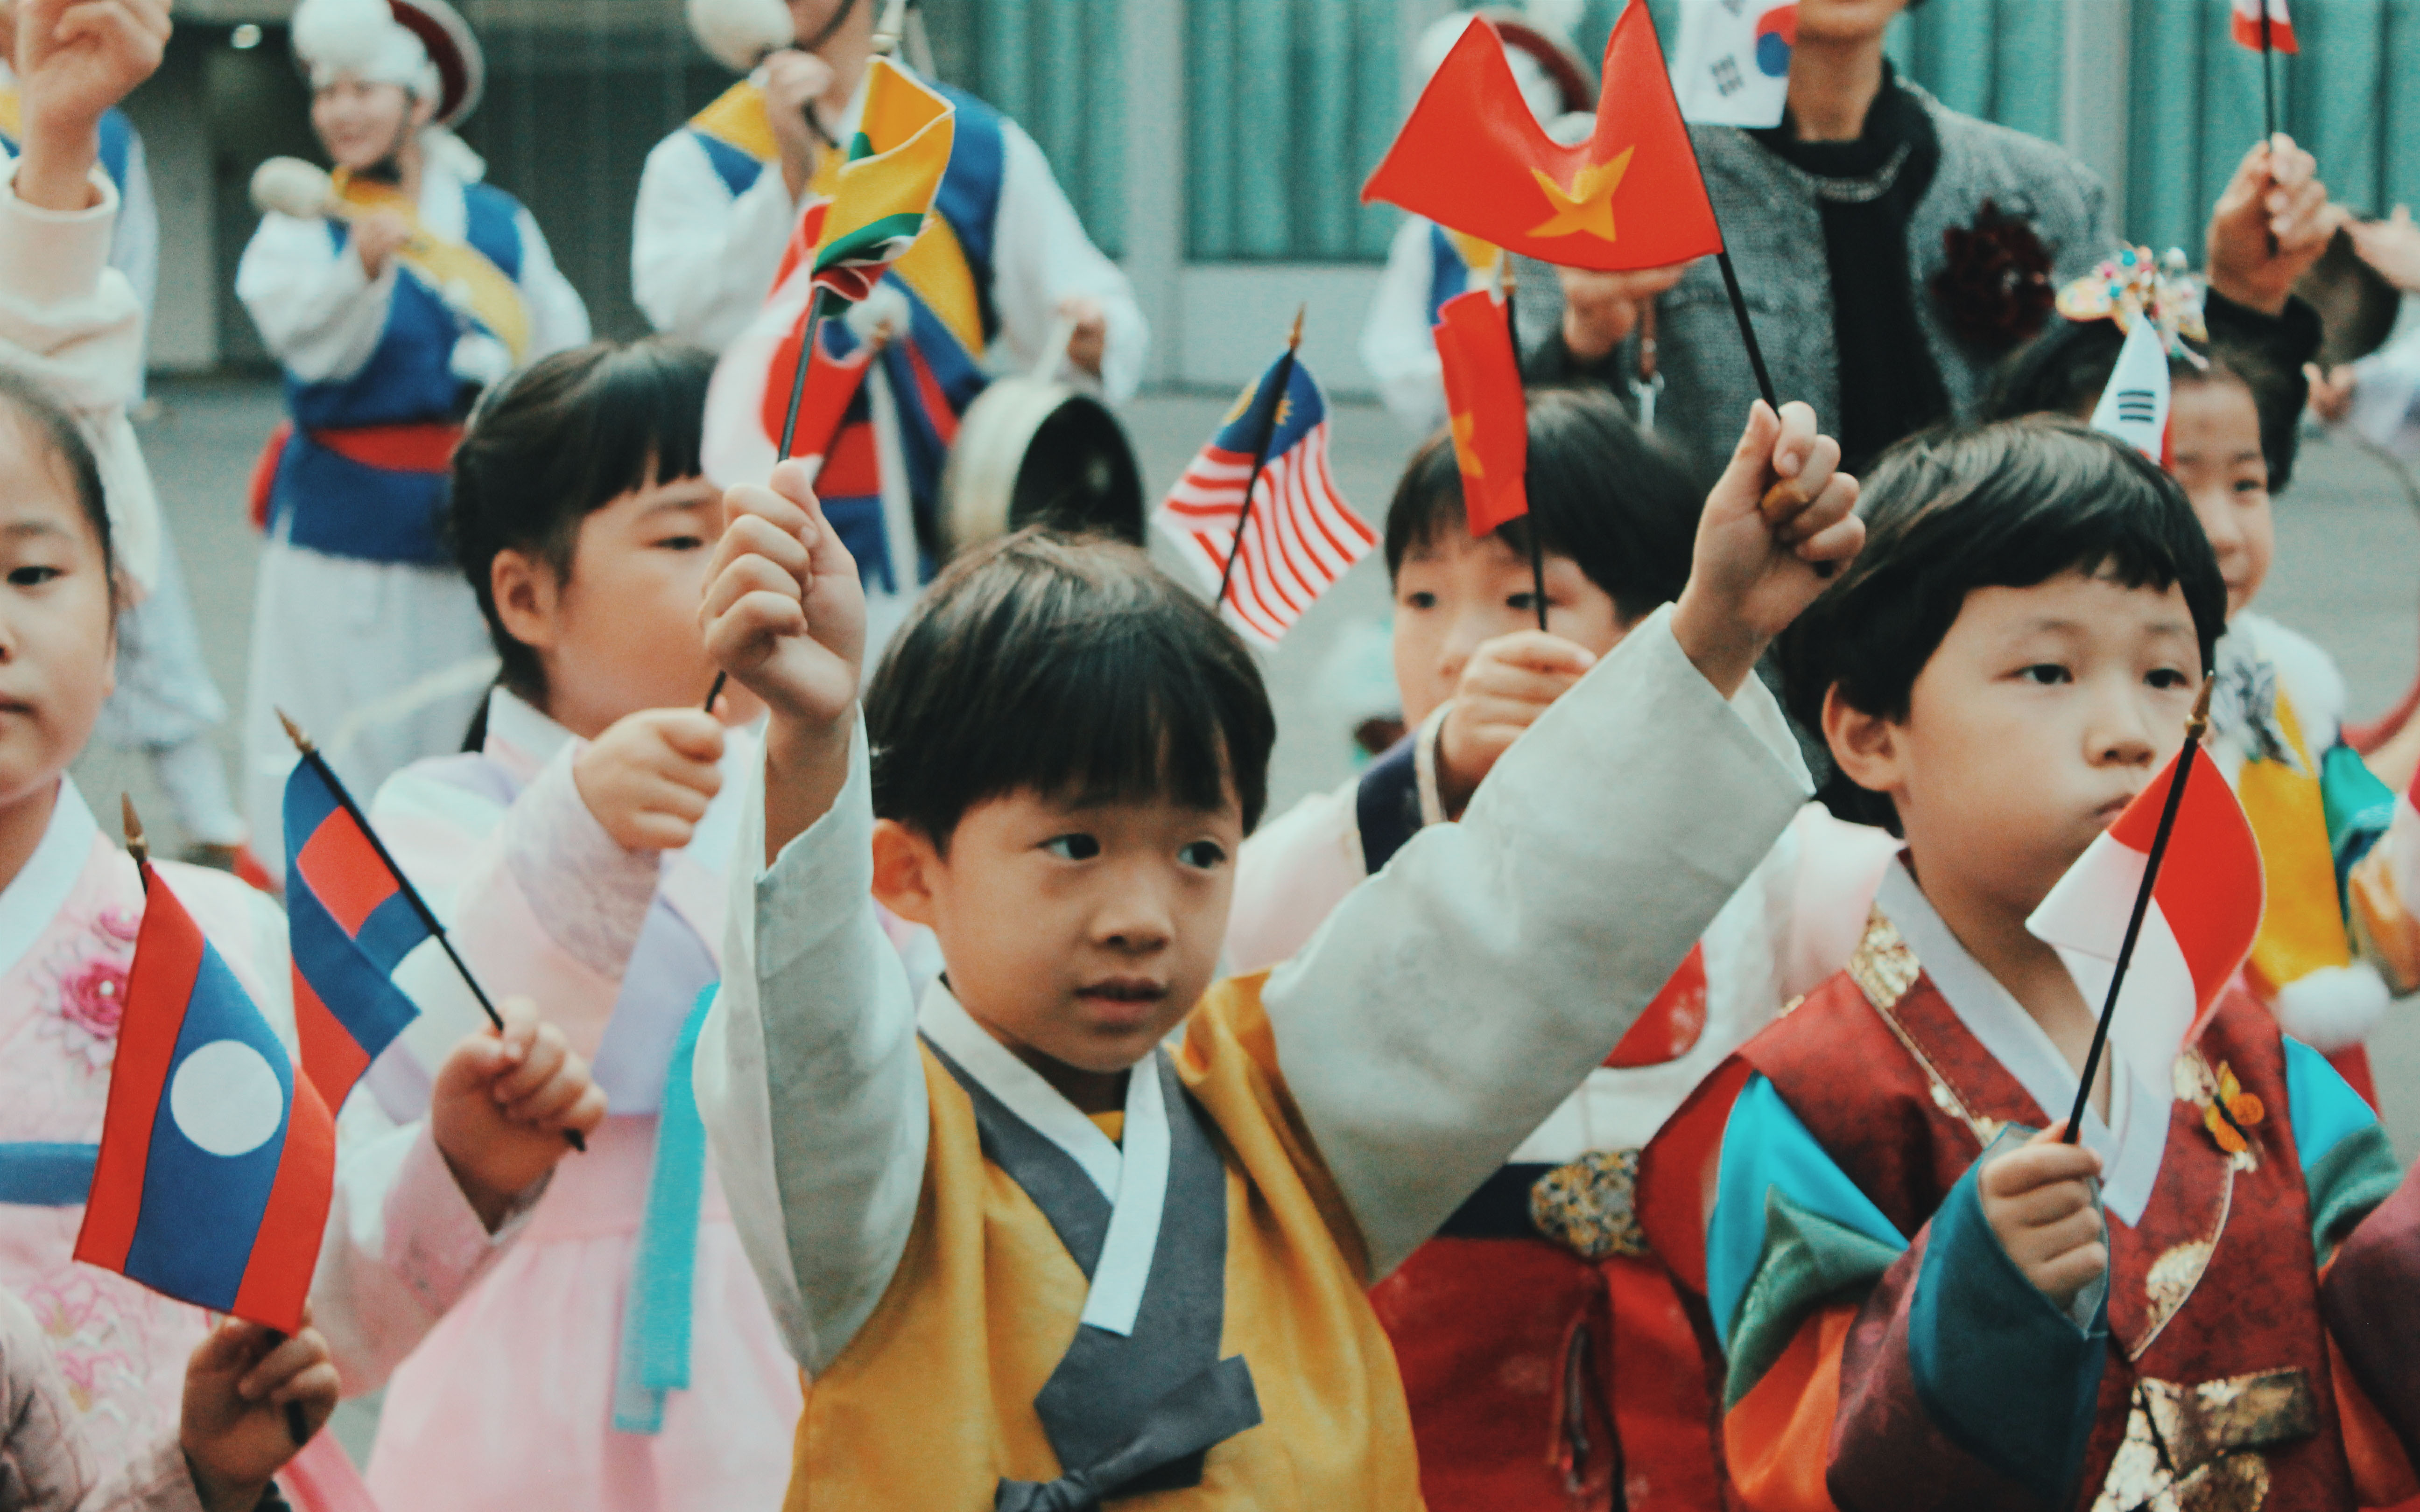 ASEAN-Korea Train participants on Oct. 17 are welcomed in Gwangju by children wearing Hanbok and waving the flags of ASEAN member countries.